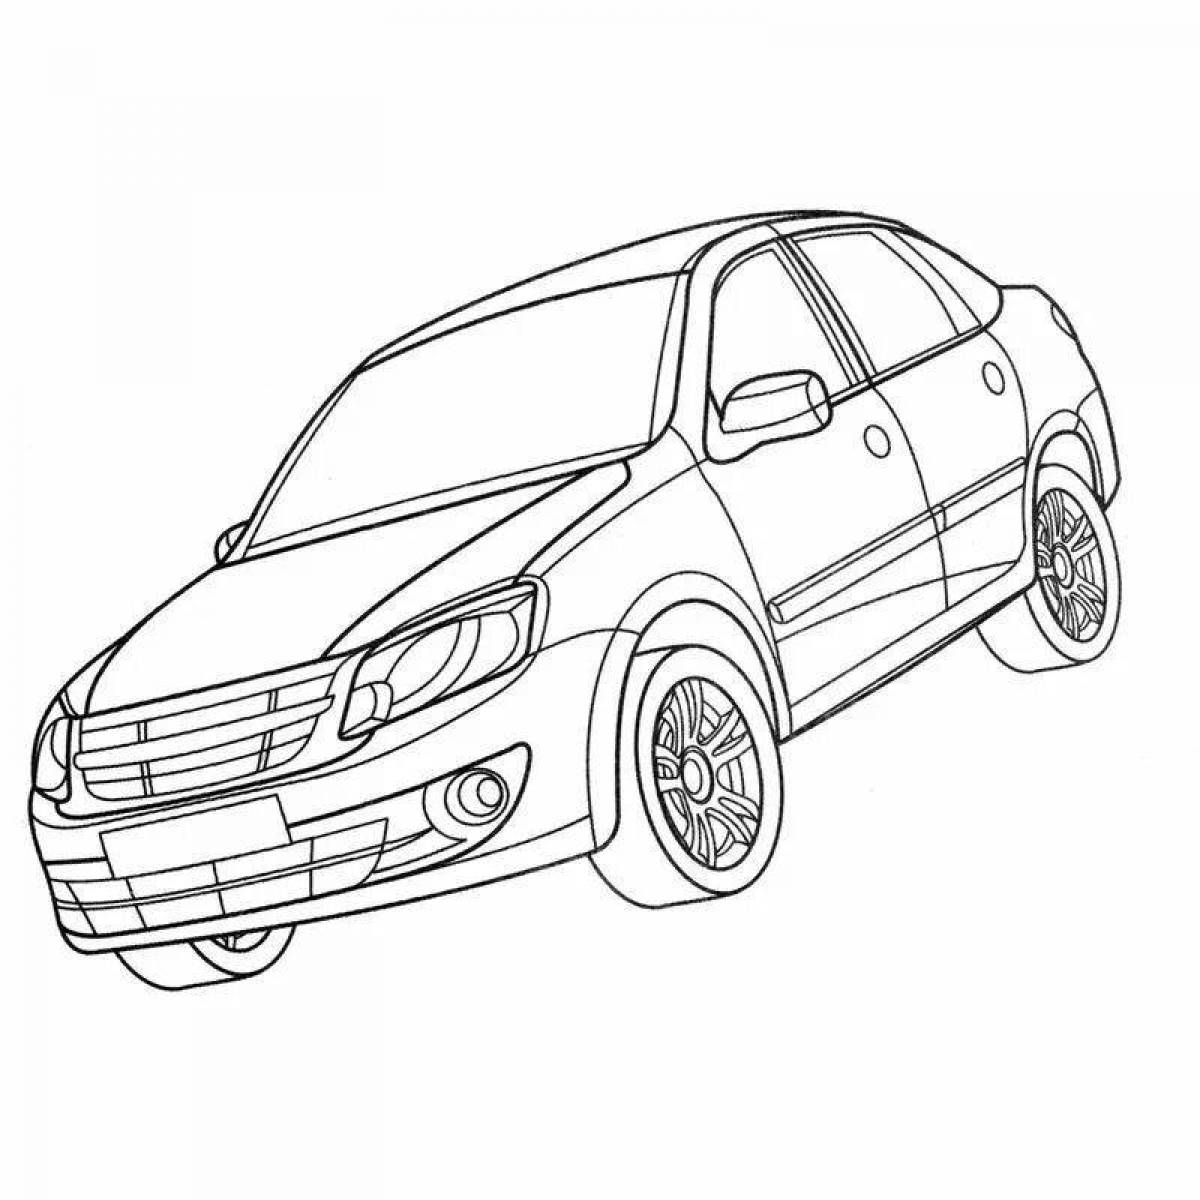 Coloring book bold cars